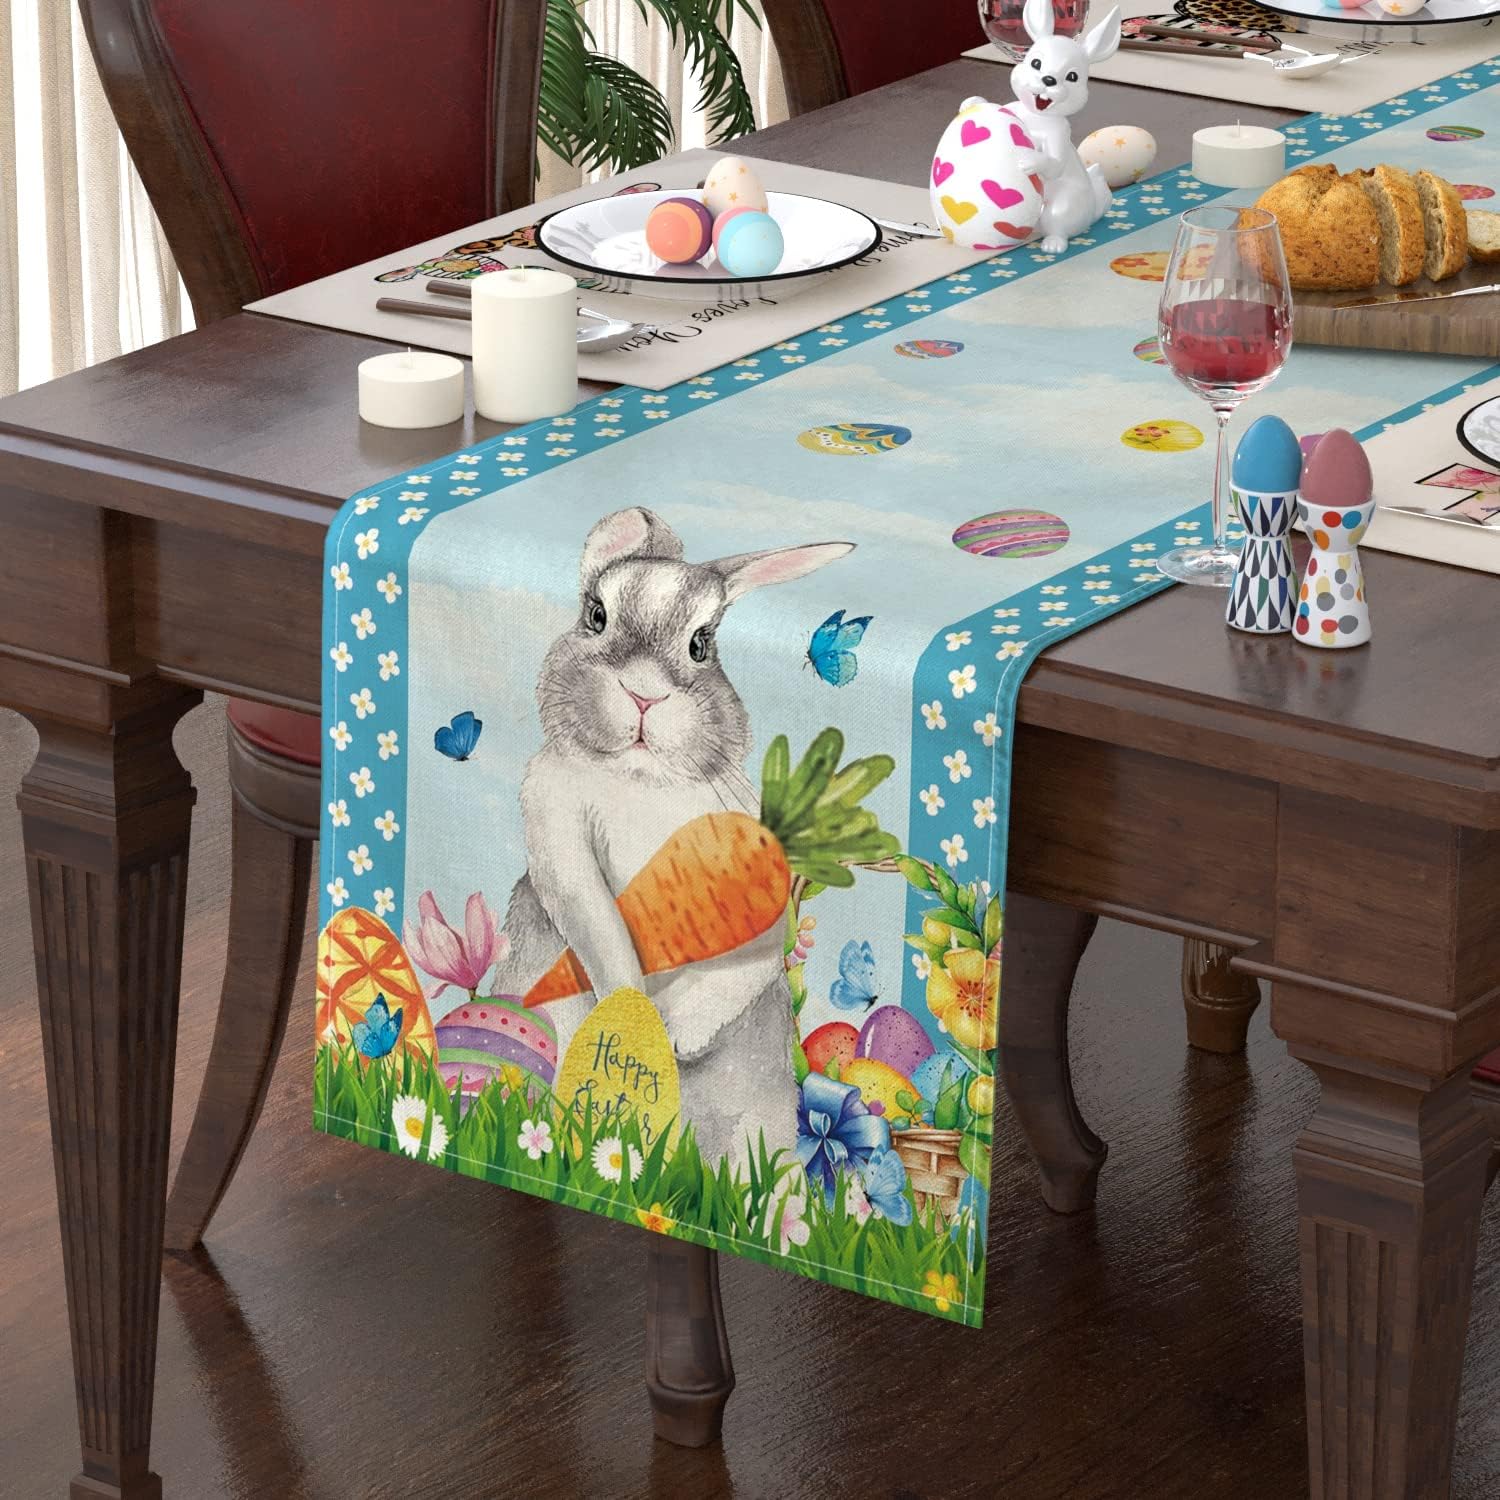 Oarencol Easter Bunny Egg Flower Table Runner Rabbit Watercolor Animal Double Sided 13x70 inch Polyester Table Cloth